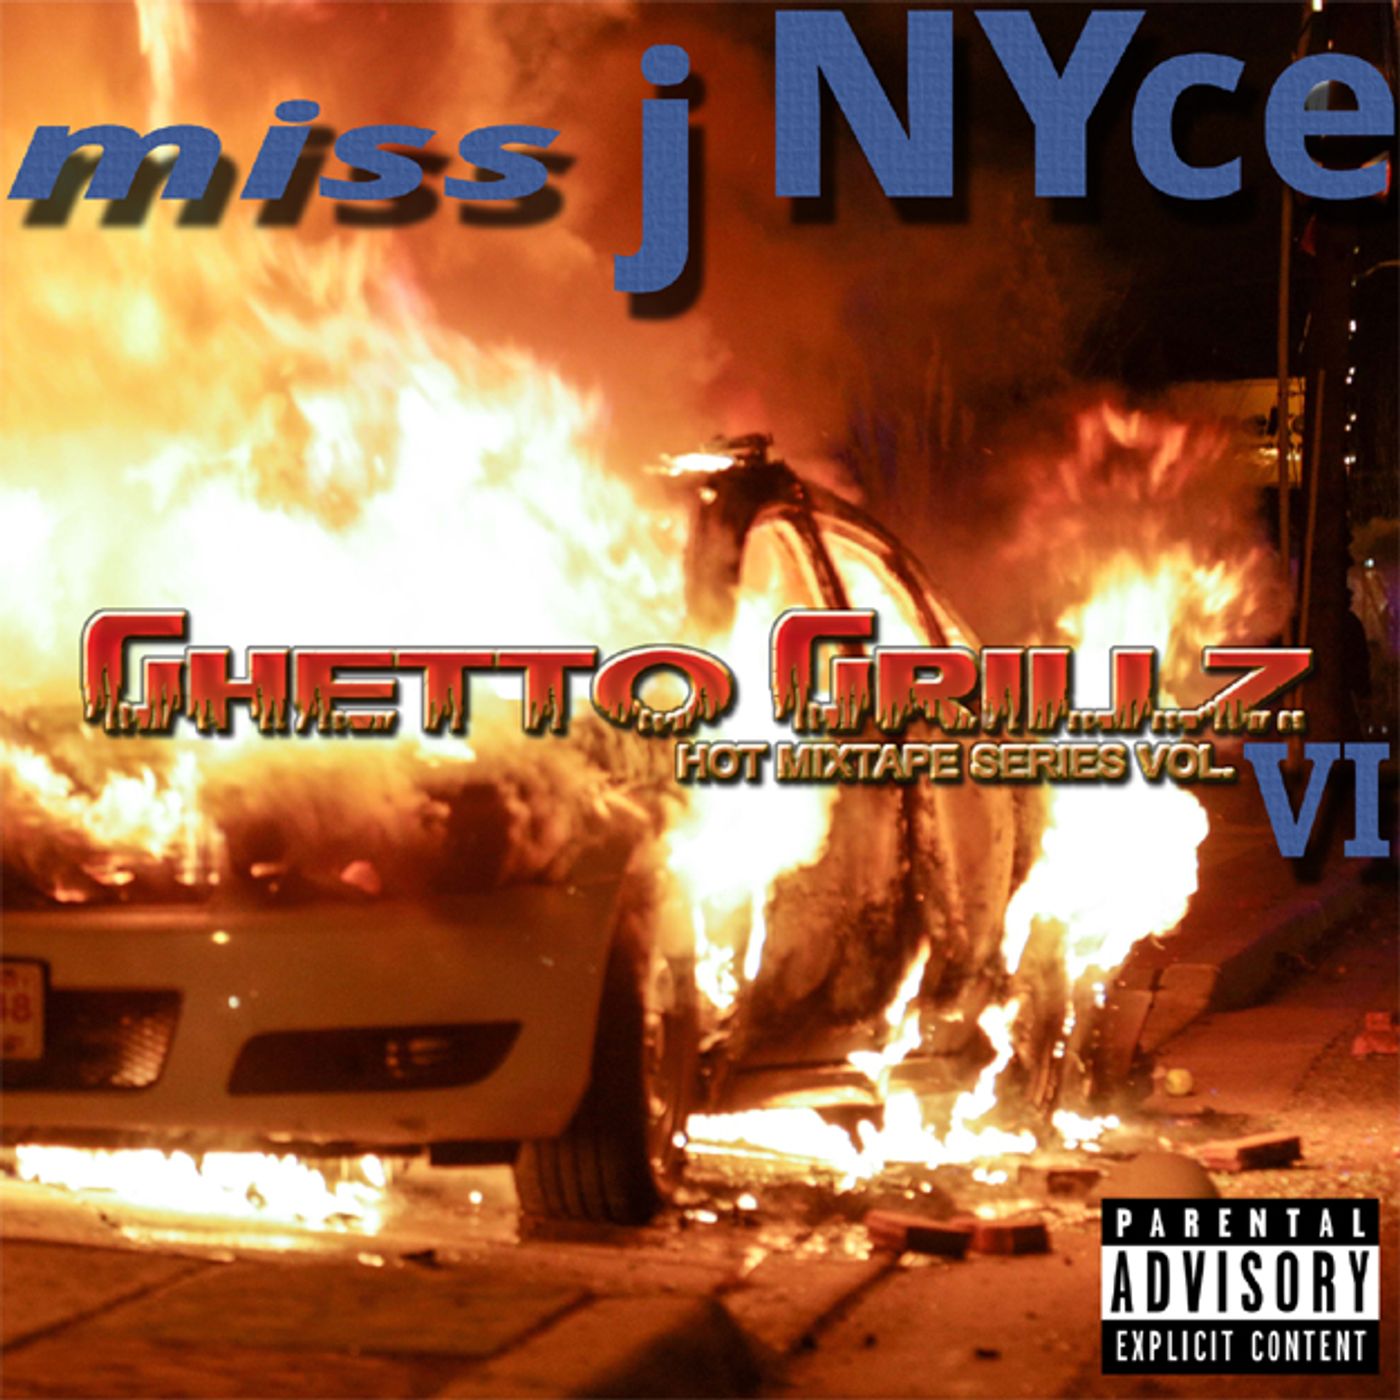 miss j NYce Ghetto Grillz 6